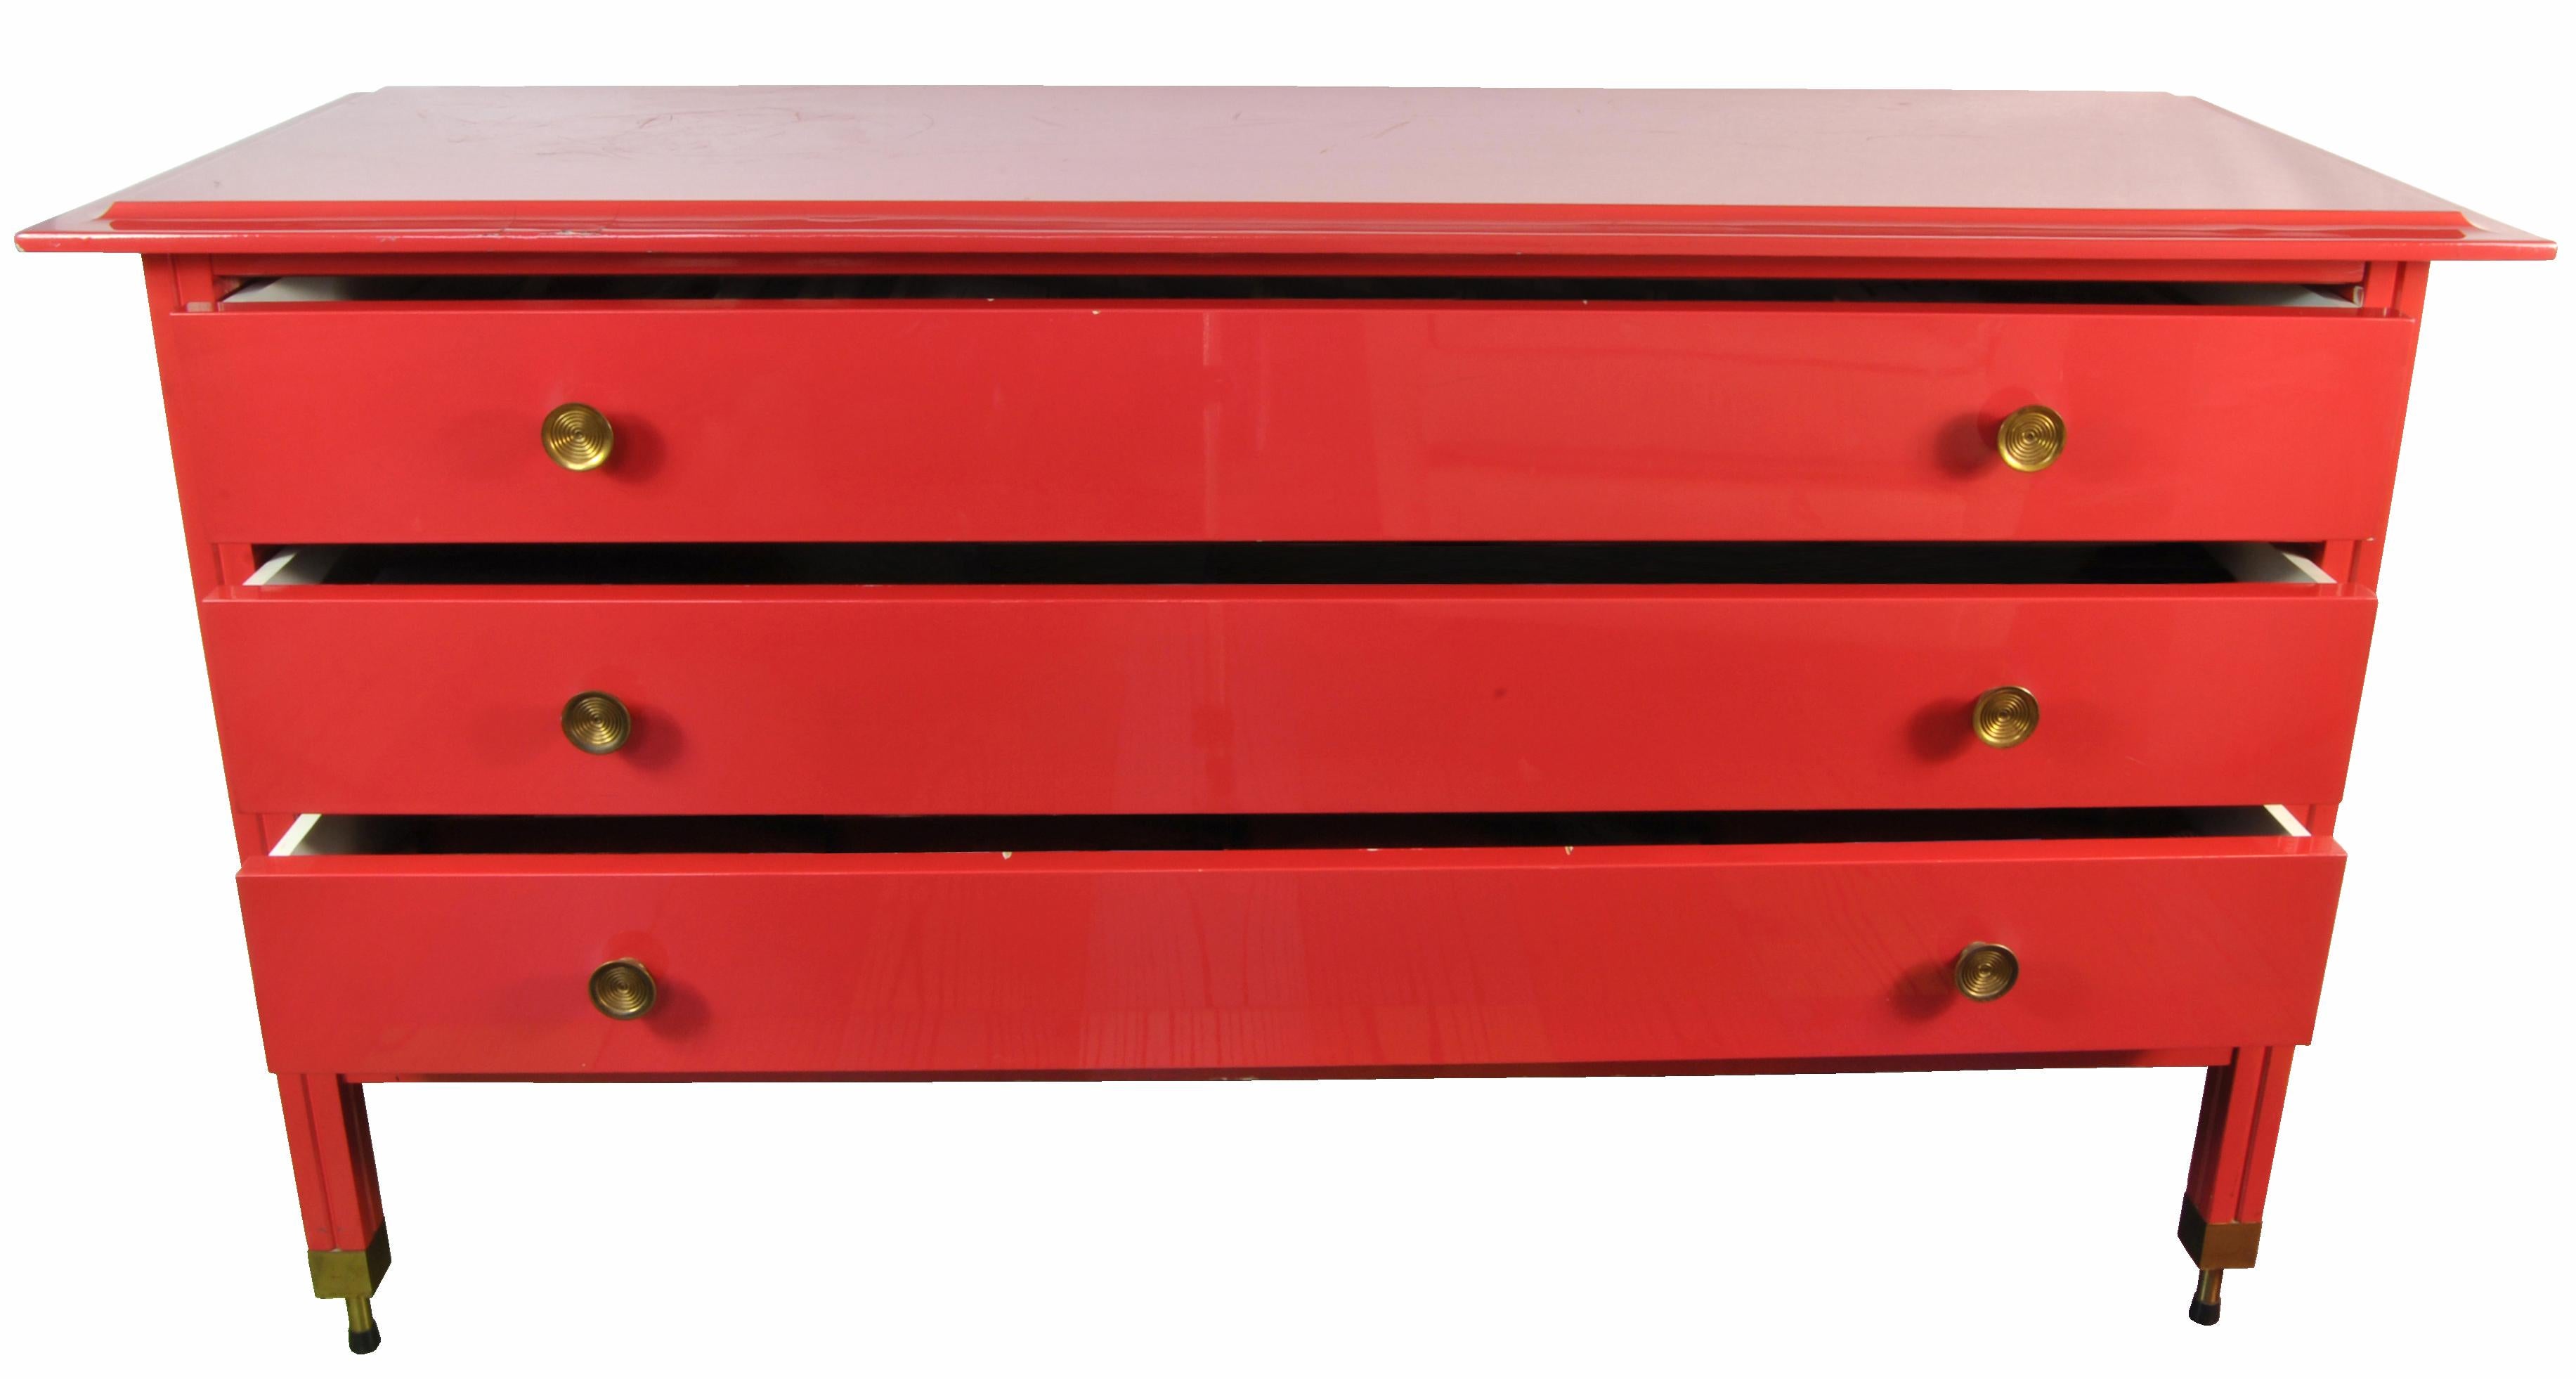 Wonderful red chest of drawers designed by Carlo de Carli in lacquered wood with nickel-plated brass details, Sormani production, Italy, 1960.
Bibliography:
- Domus, n. 410, gennaio 1964, p. d/190 
- Domus, n. 425, aprile 1965, p. 53 
- Domus,